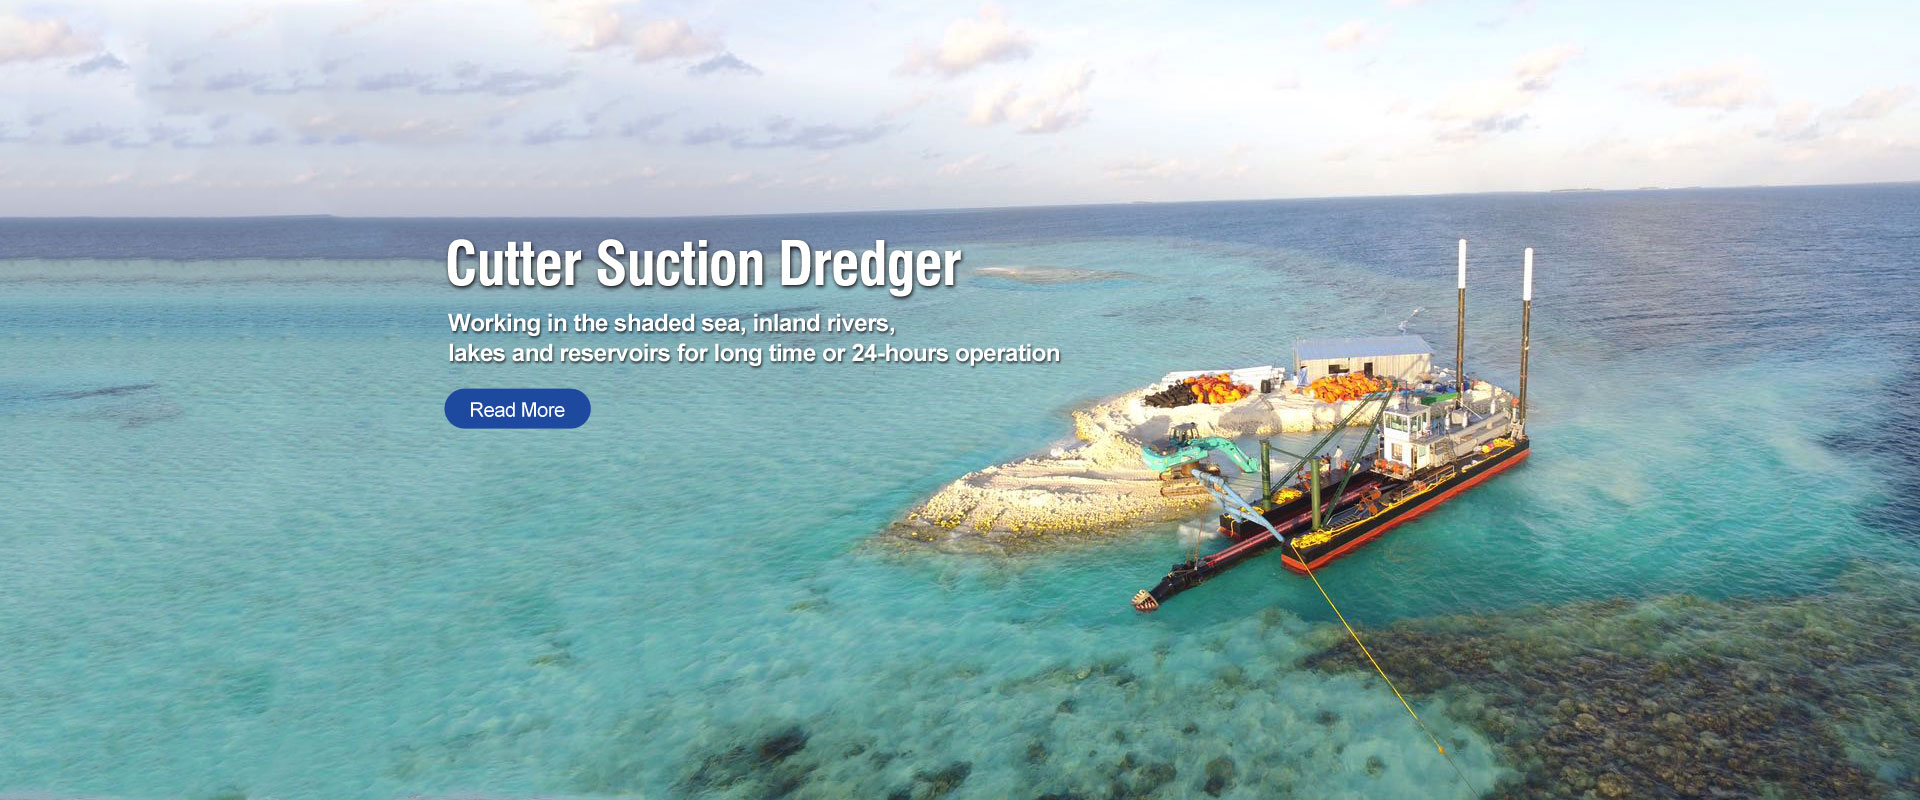 China Cutter Suction Dredger Suppliers